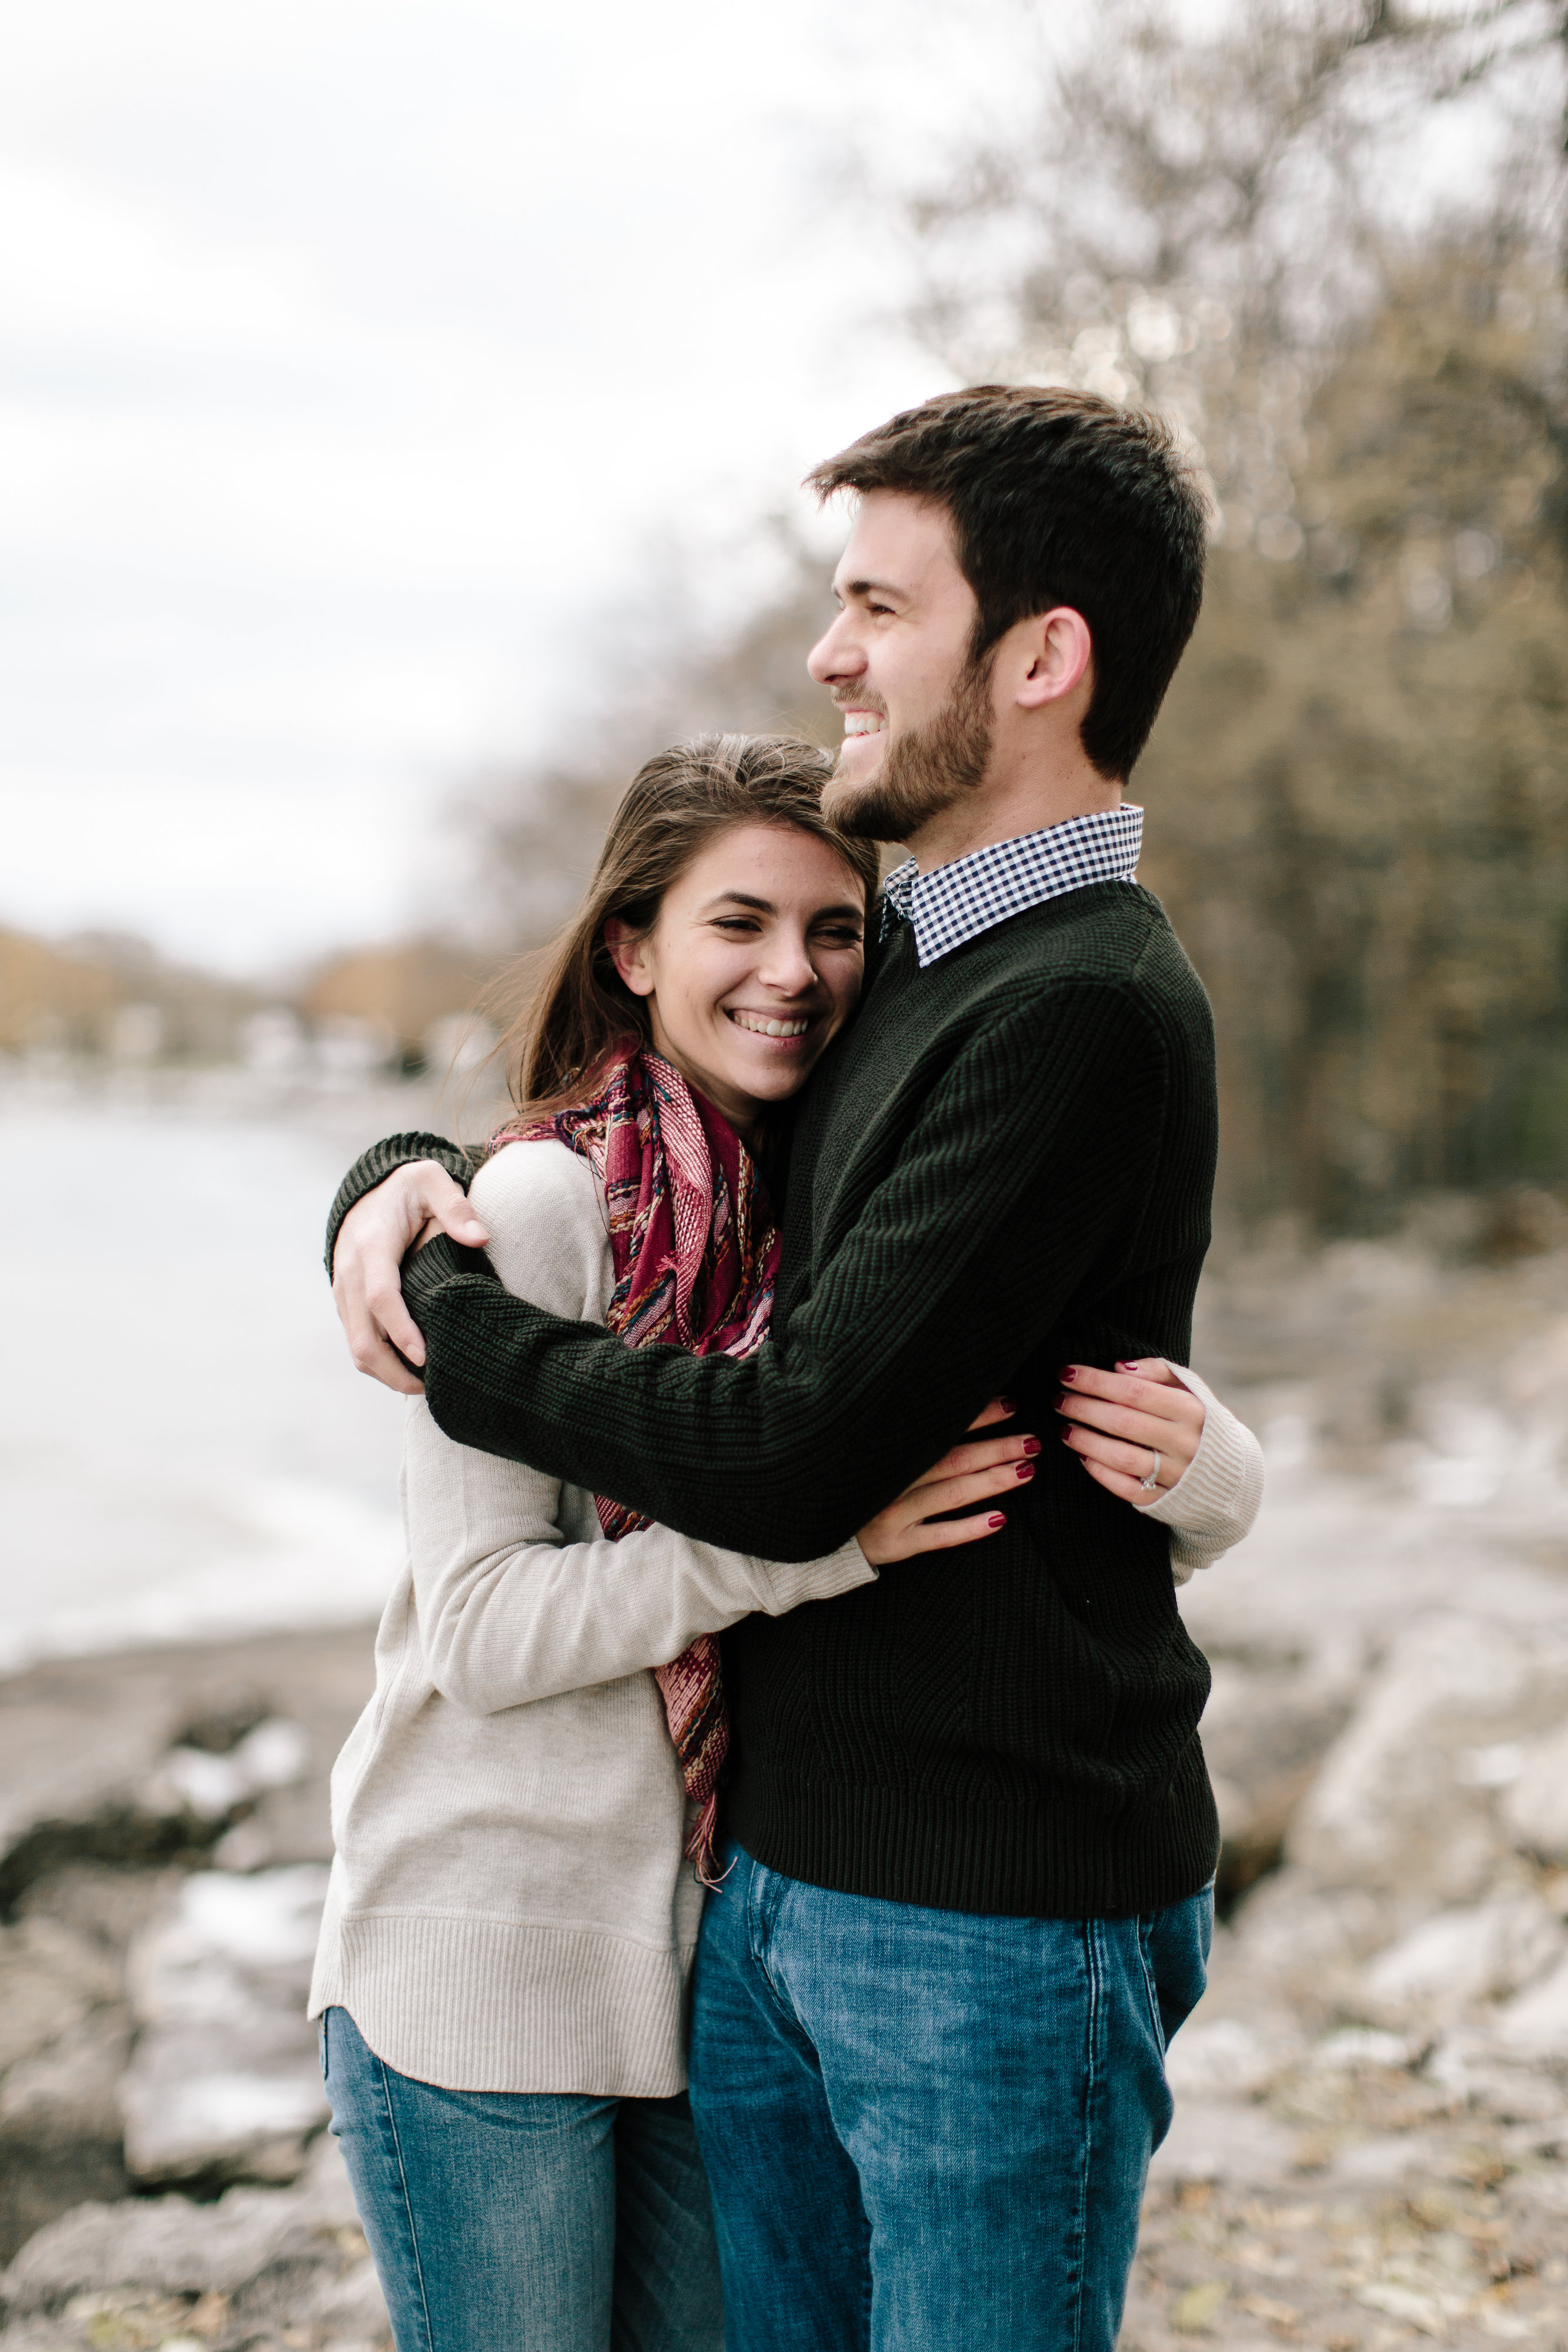 Lakeside Engagement Session in Winter | Colin & Brittney - Austin ...